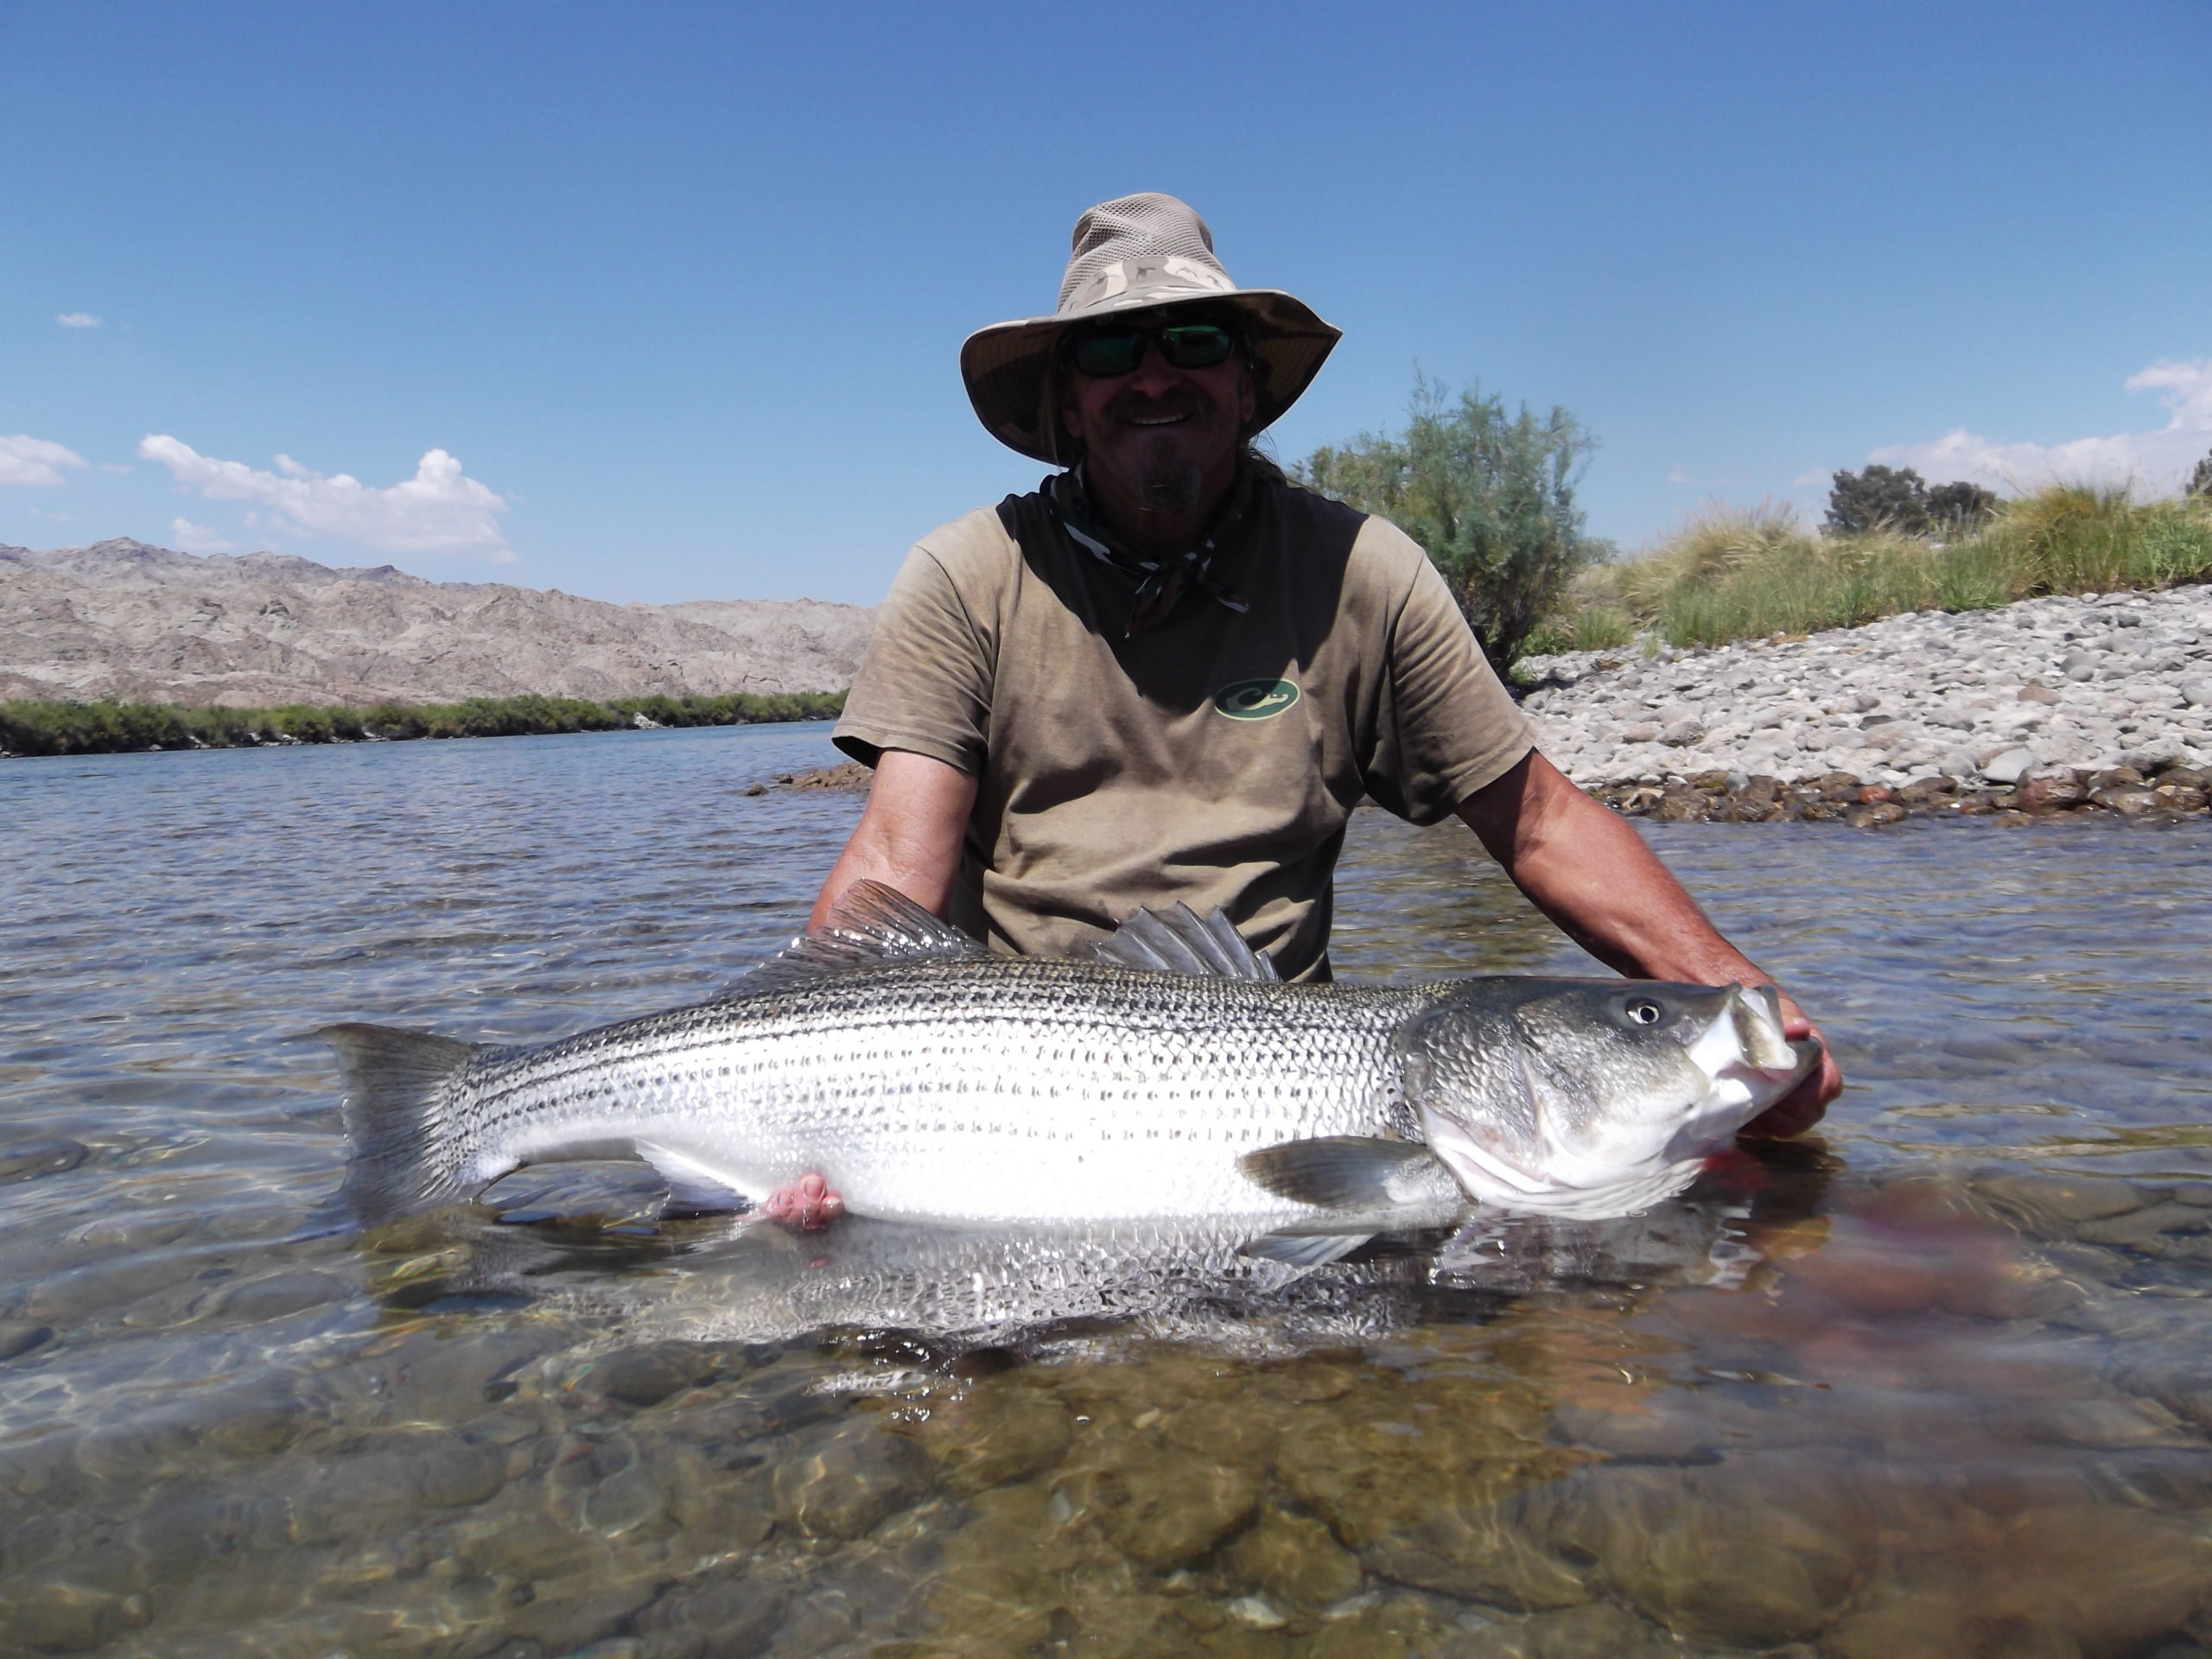 The one-of-a-kind Colorado River chain